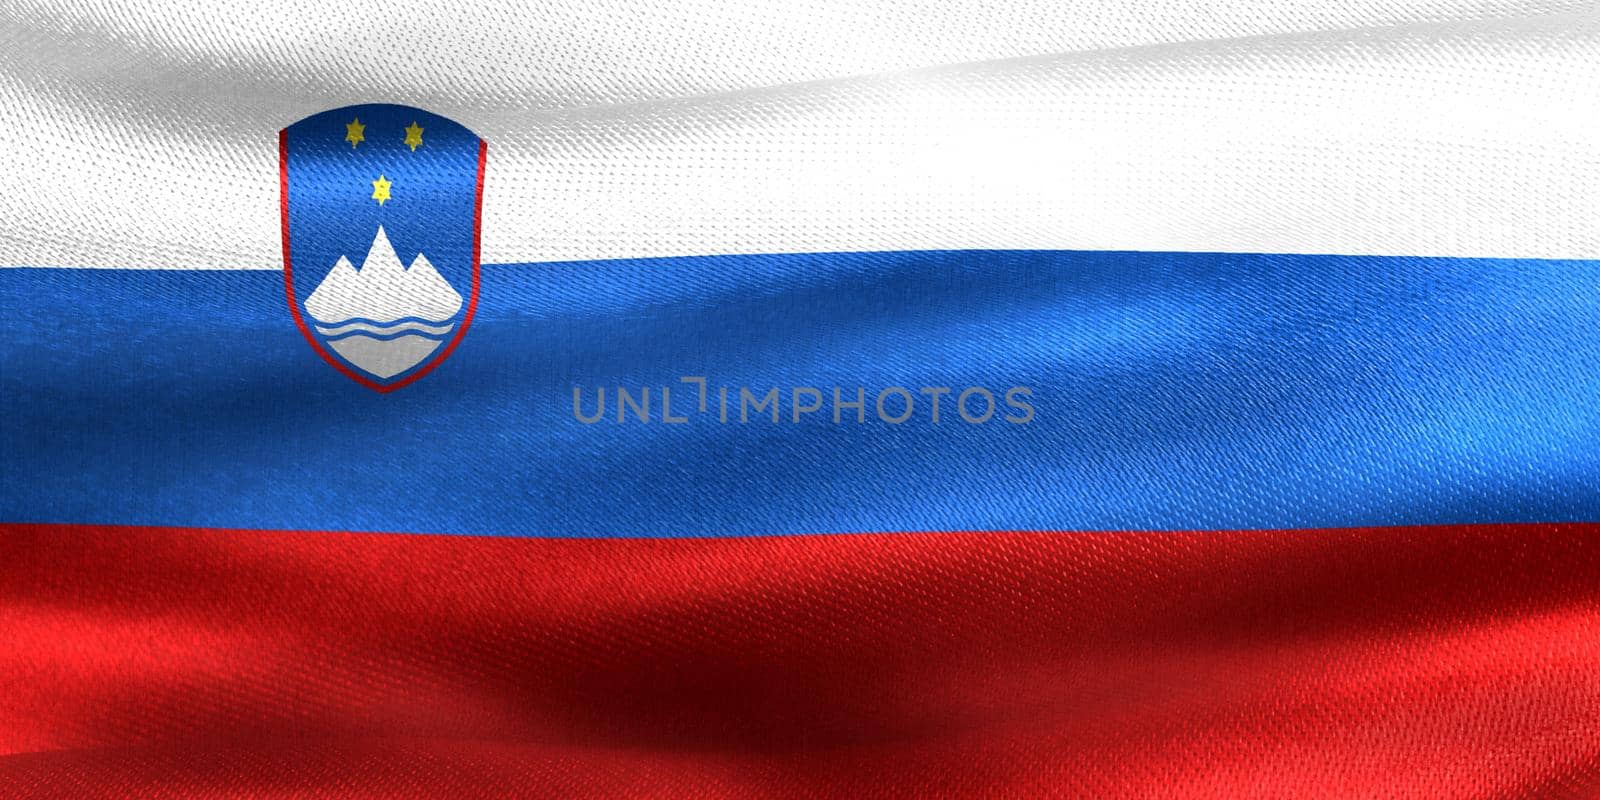 3D-Illustration of a Slovenia flag - realistic waving fabric flag by MP_foto71